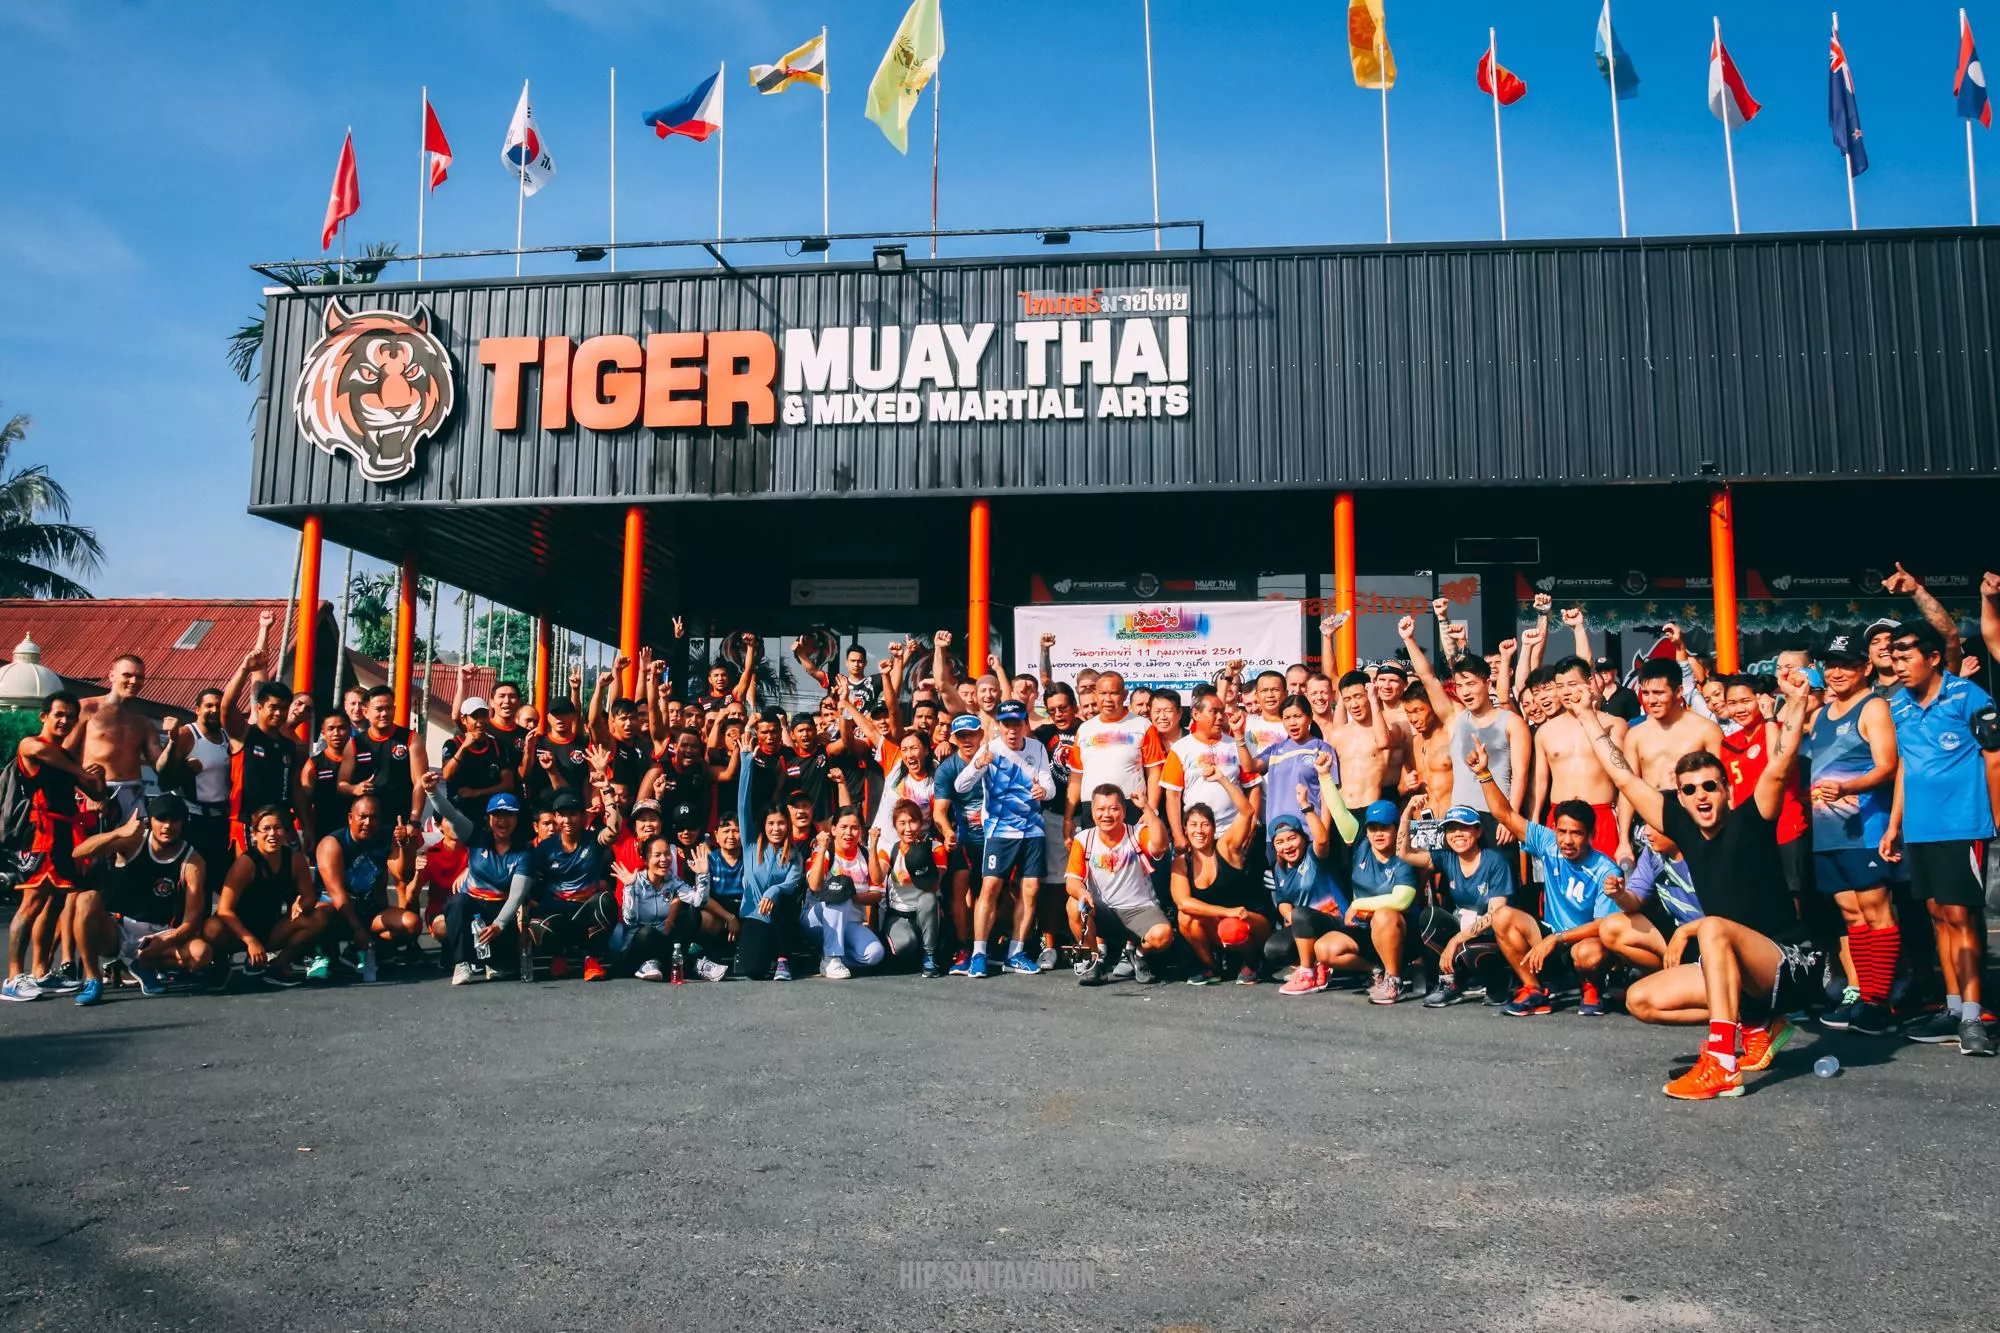 Tiger Muay Thai in Thailand, Central Asia | Martial Arts - Rated 4.9